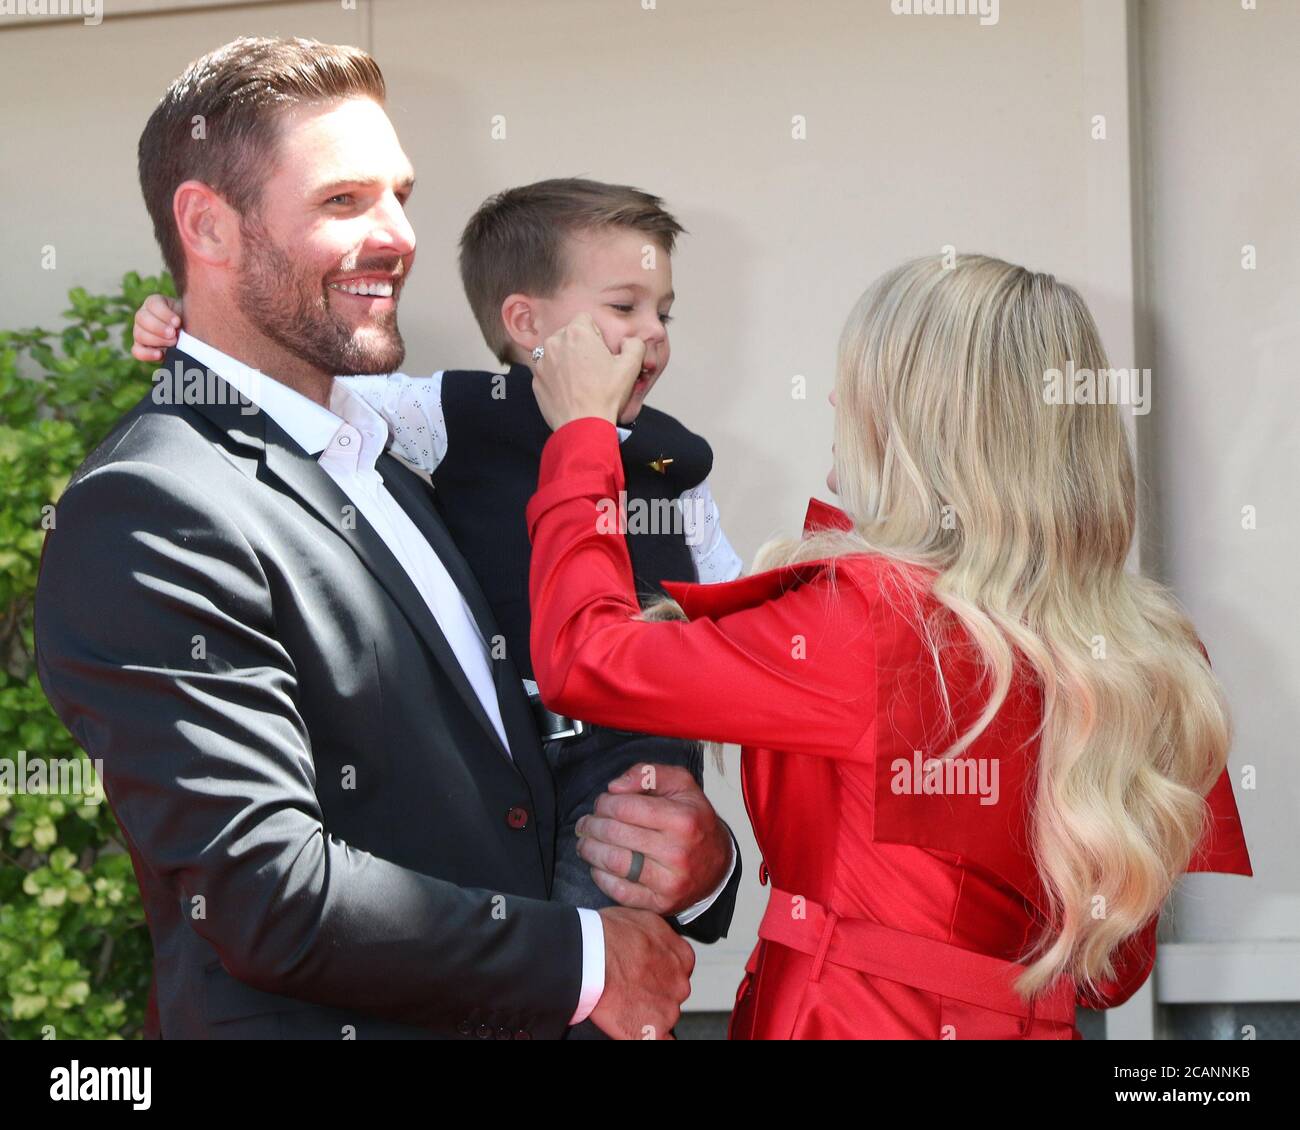 LOS ANGELES - SET 20: Mike Fisher, Isaiah Fisher, Carrie Underwood alla cerimonia Carrie Underwood Star sulla Hollywood Walk of Fame il 20 settembre 2018 a Los Angeles, California Foto Stock